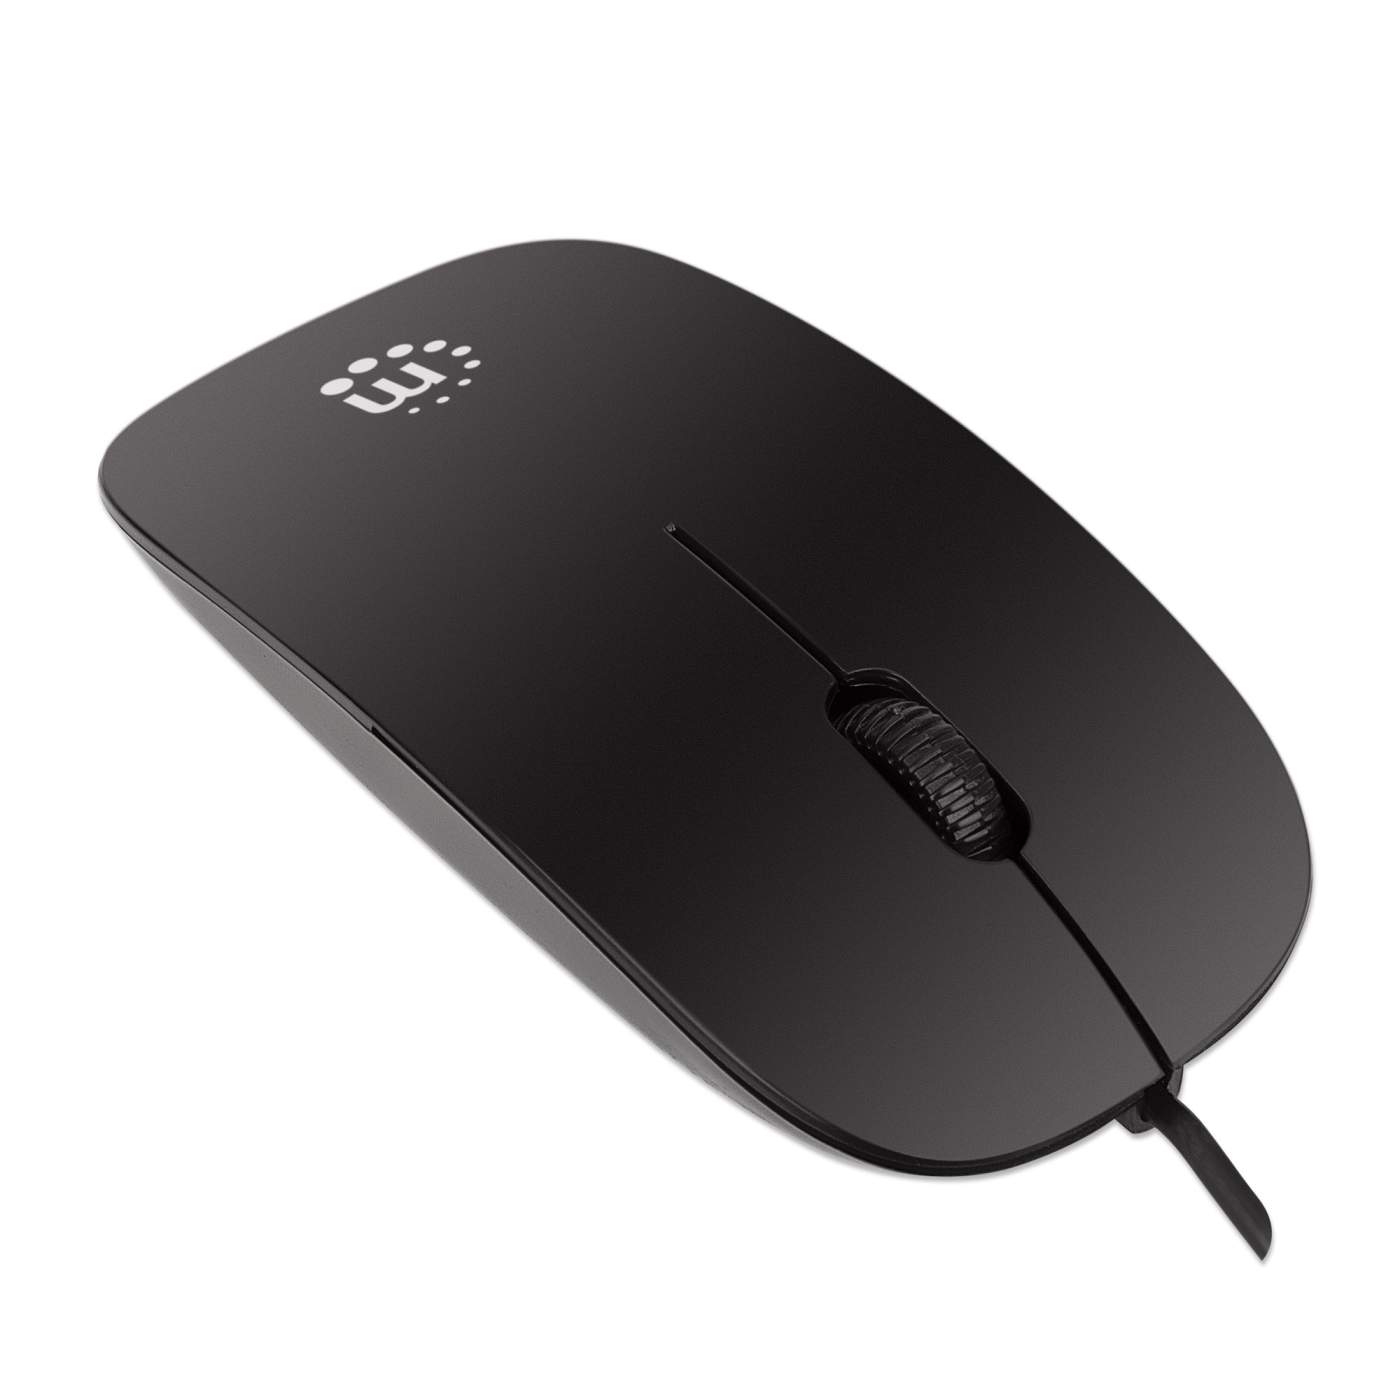 Silhouette Optical Mouse Image 6